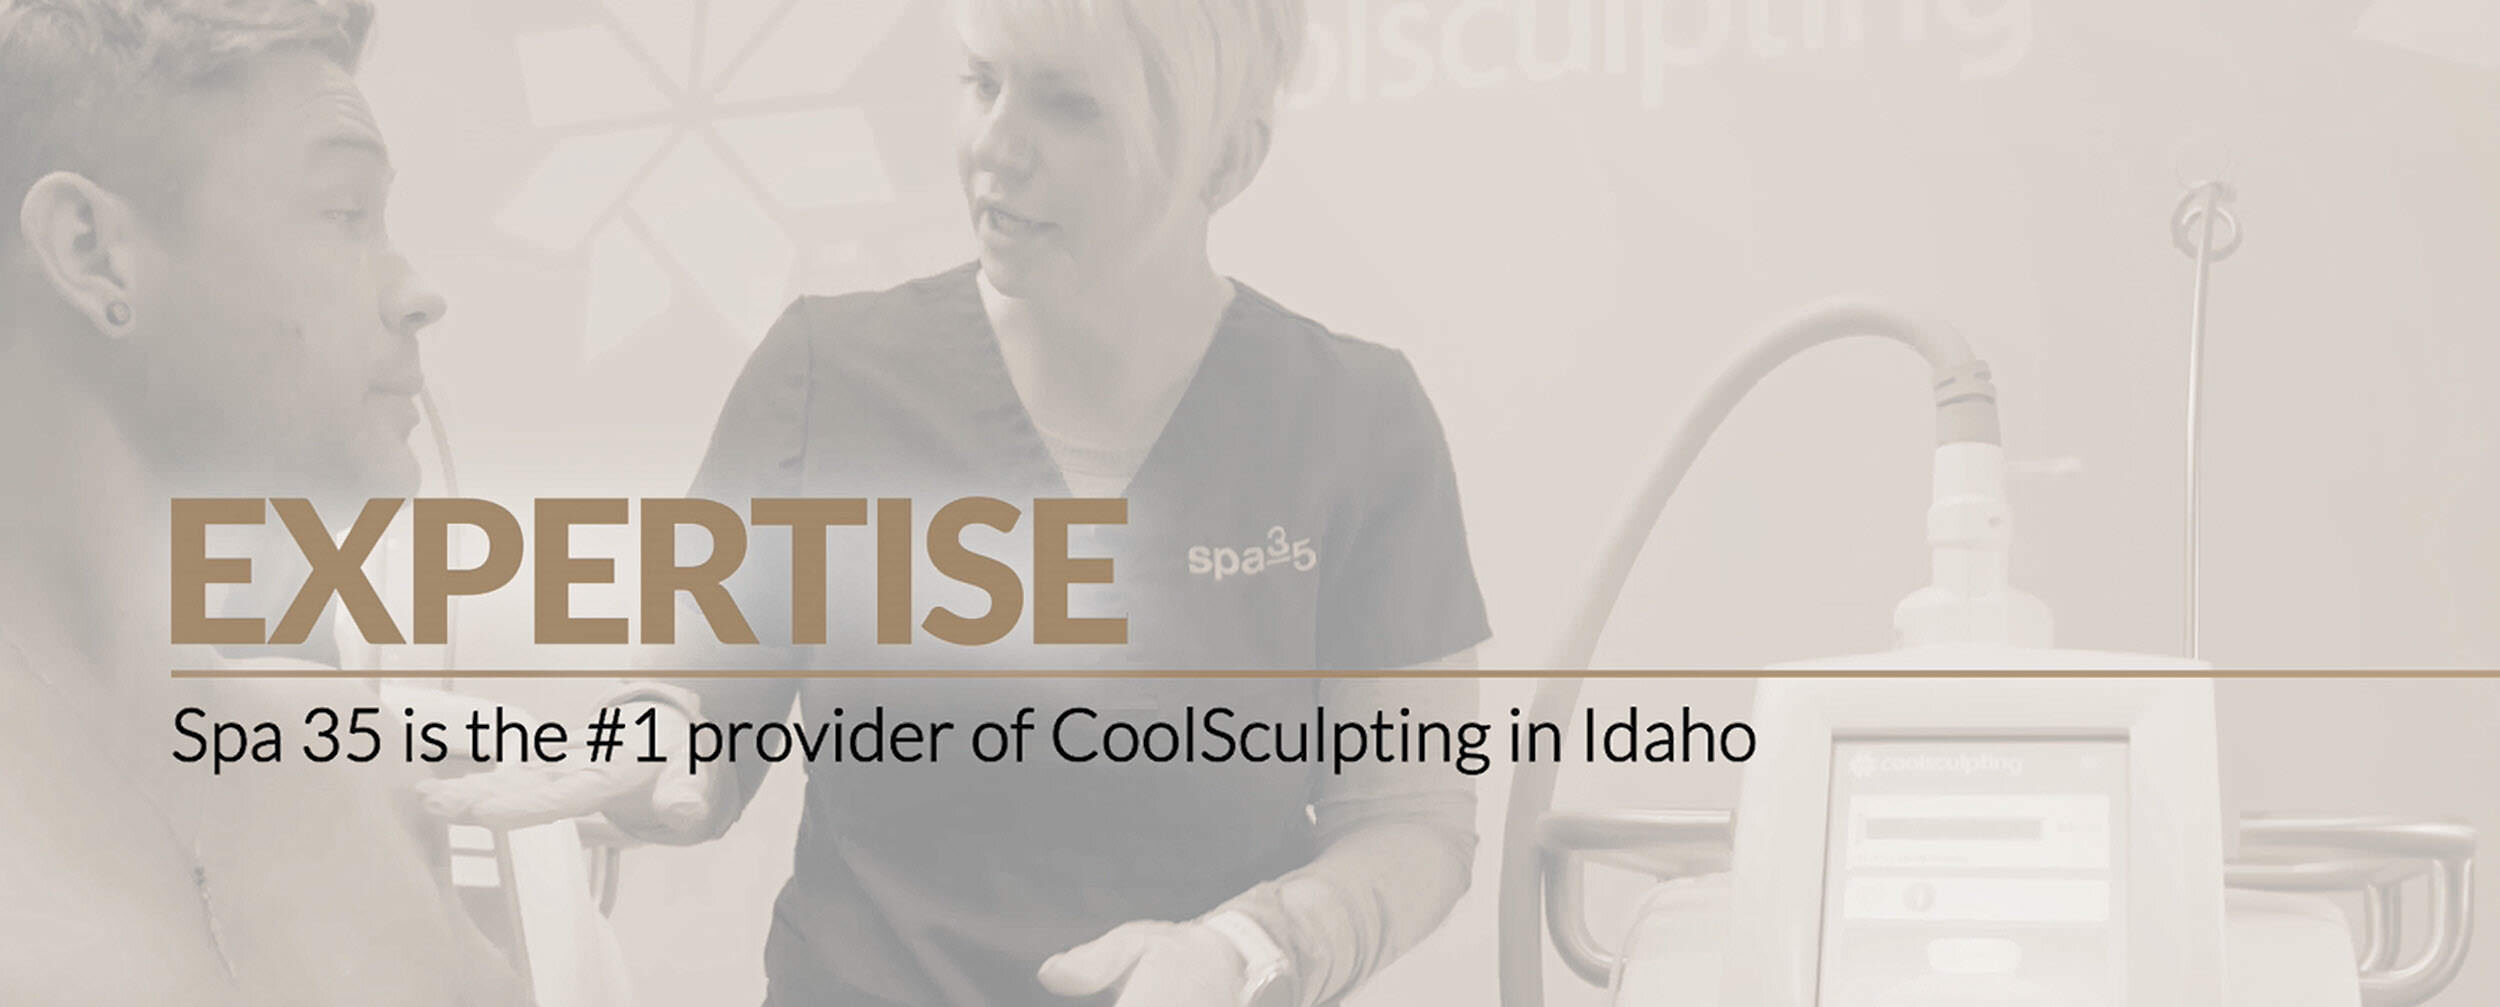 Master Certified in CoolSculpting, Consultants to Candela Medical - Worldwide leaders in cosmetic lasers (Copy) (Copy)